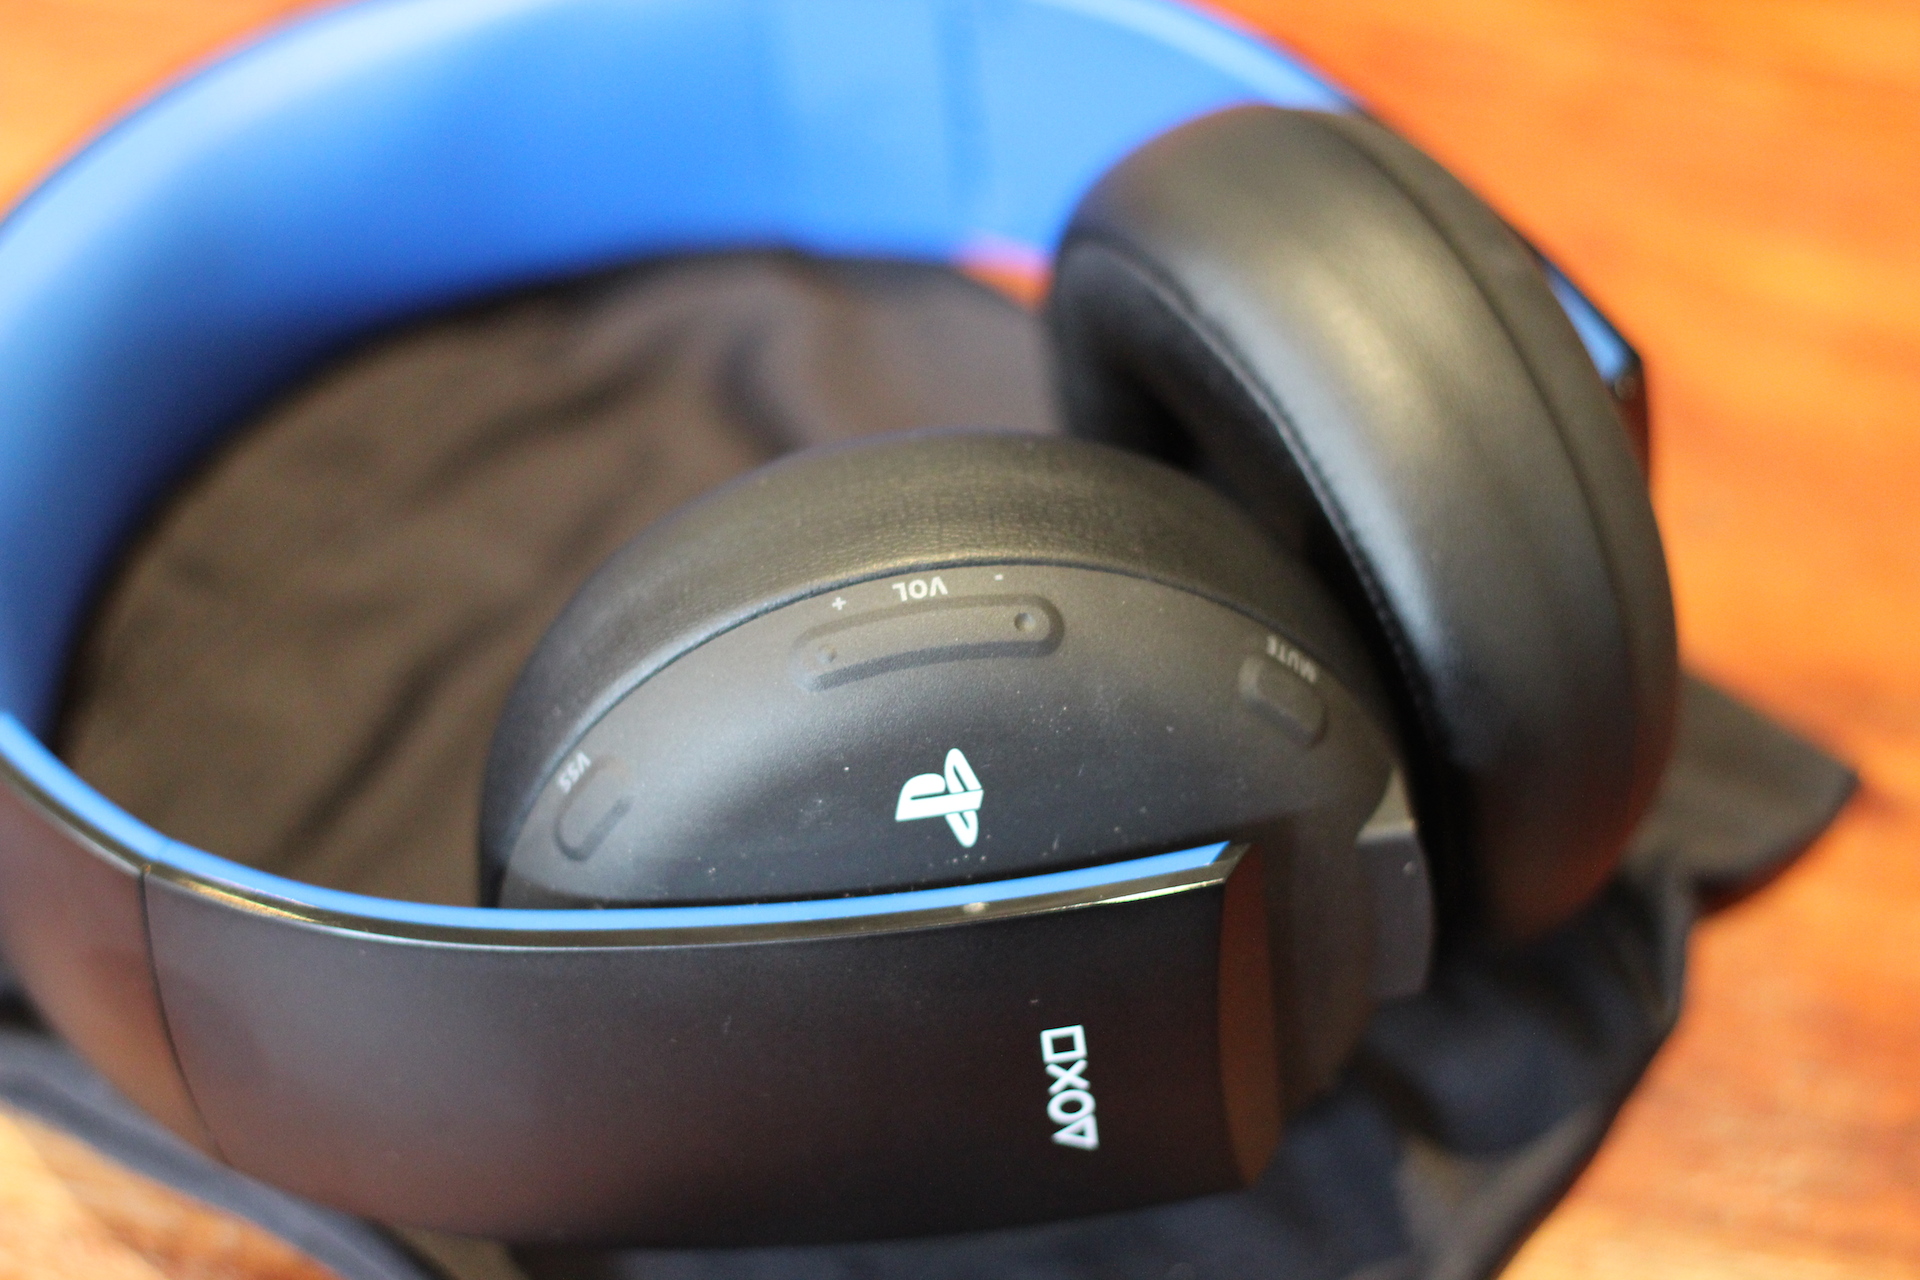 The PlayStation Gold Wireless Headset: Not Bad For A Hundred Bucks